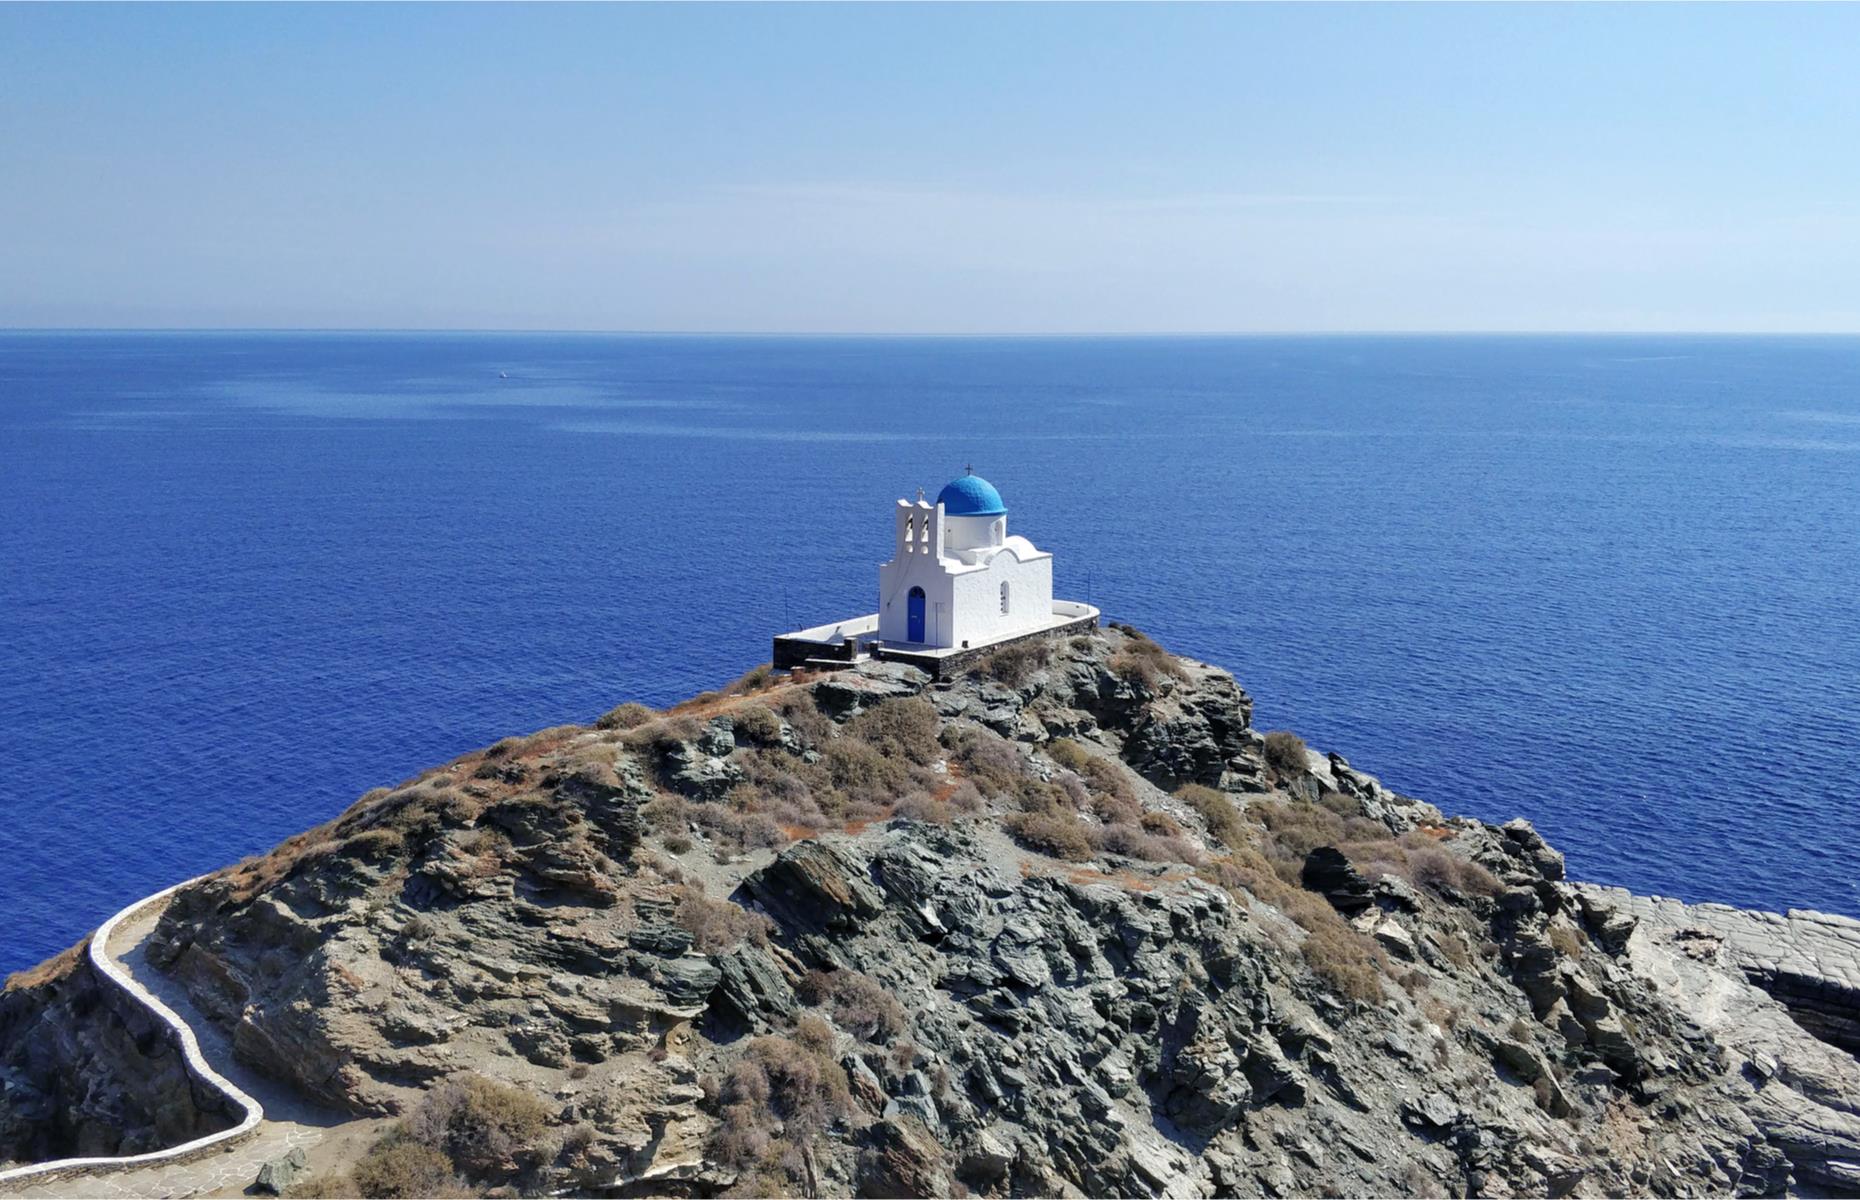 <p>The isolated Church of the Seven Martyrs, which lies just beneath Kastro, is one of many churches on the island and its most famous sight. Across Greece, Sifnos is renowned for its culinary traditions – it was home to one of the country’s first famous chefs, Nicholas Tselementes. Seafood and chickpeas are staples of Sifniot cooking, the latter are cooked as a hearty soup in island-made earthenware pots, as are delicious pastries and sweets. Stay in the charming guesthouse <a href="https://www.booking.com/hotel/gr/astra-verina.en-gb.html?aid=1280739" rel="nofollow">Verina Astra in Artemonas</a>, a great base for seeking out the island’s traditional tavernas and artisan shops. </p>  <p><a href="https://www.loveexploring.com/news/92061/6-essential-experiences-on-sifnos-greece"><strong>For more reasons to seek out Sifnos, read our guide</strong></a></p>